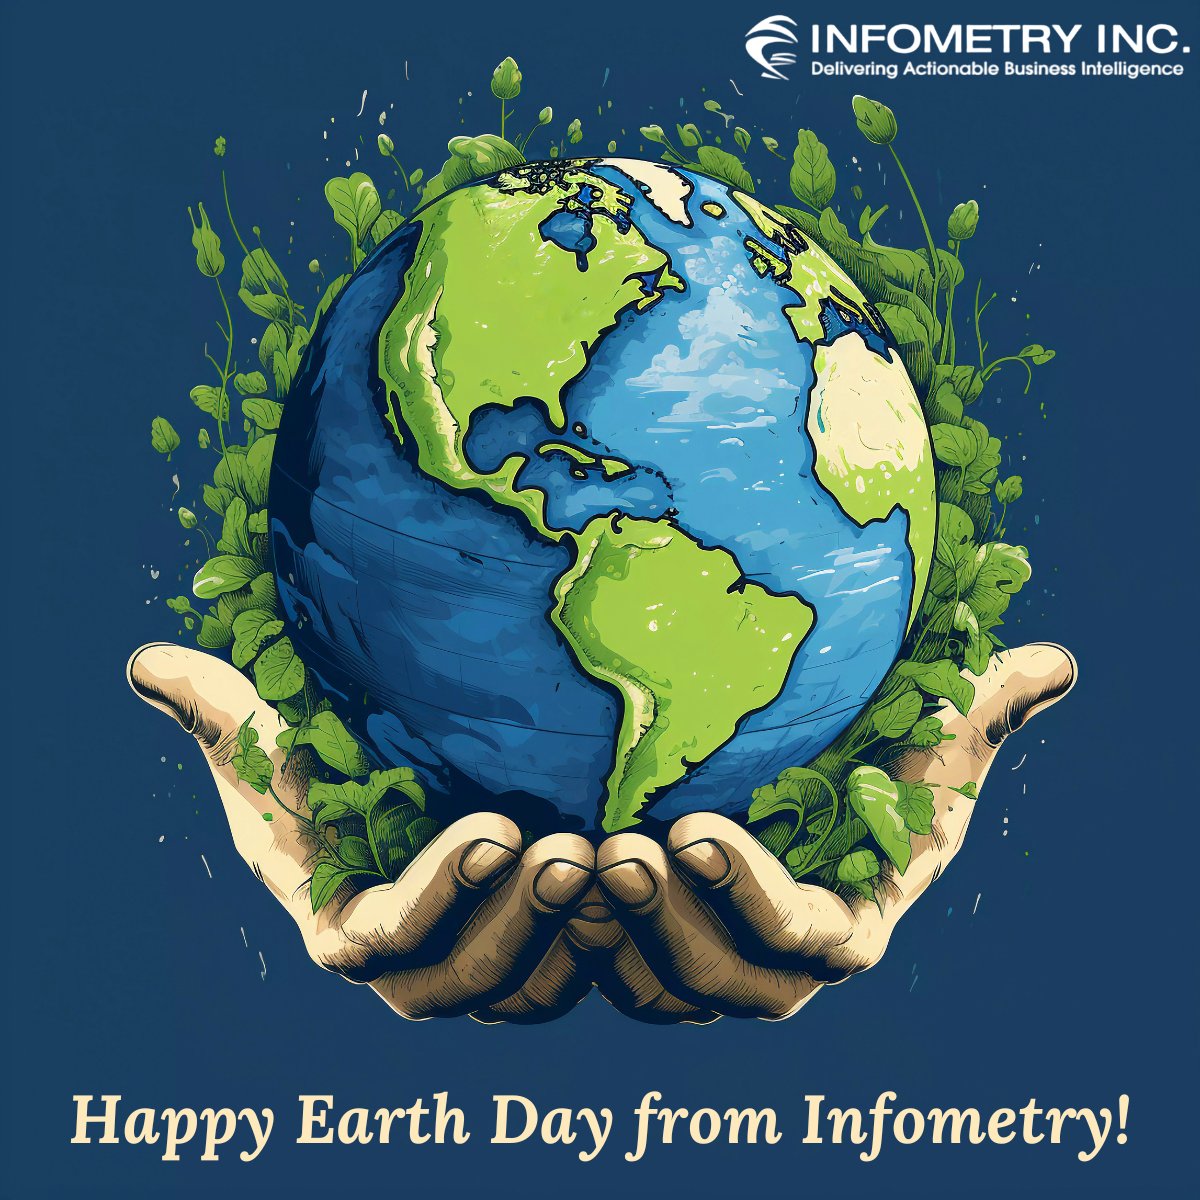 Infometry Celebrates Earth Day!  Let's work together to measure and improve our impact on the planet. Happy Earth Day!
.
.
.
#EarthDay2024 #SustainableSolutions #EnvironmentalResponsibility #ProtectOurPlanet #ClimateAction #GoGreen #Infometry